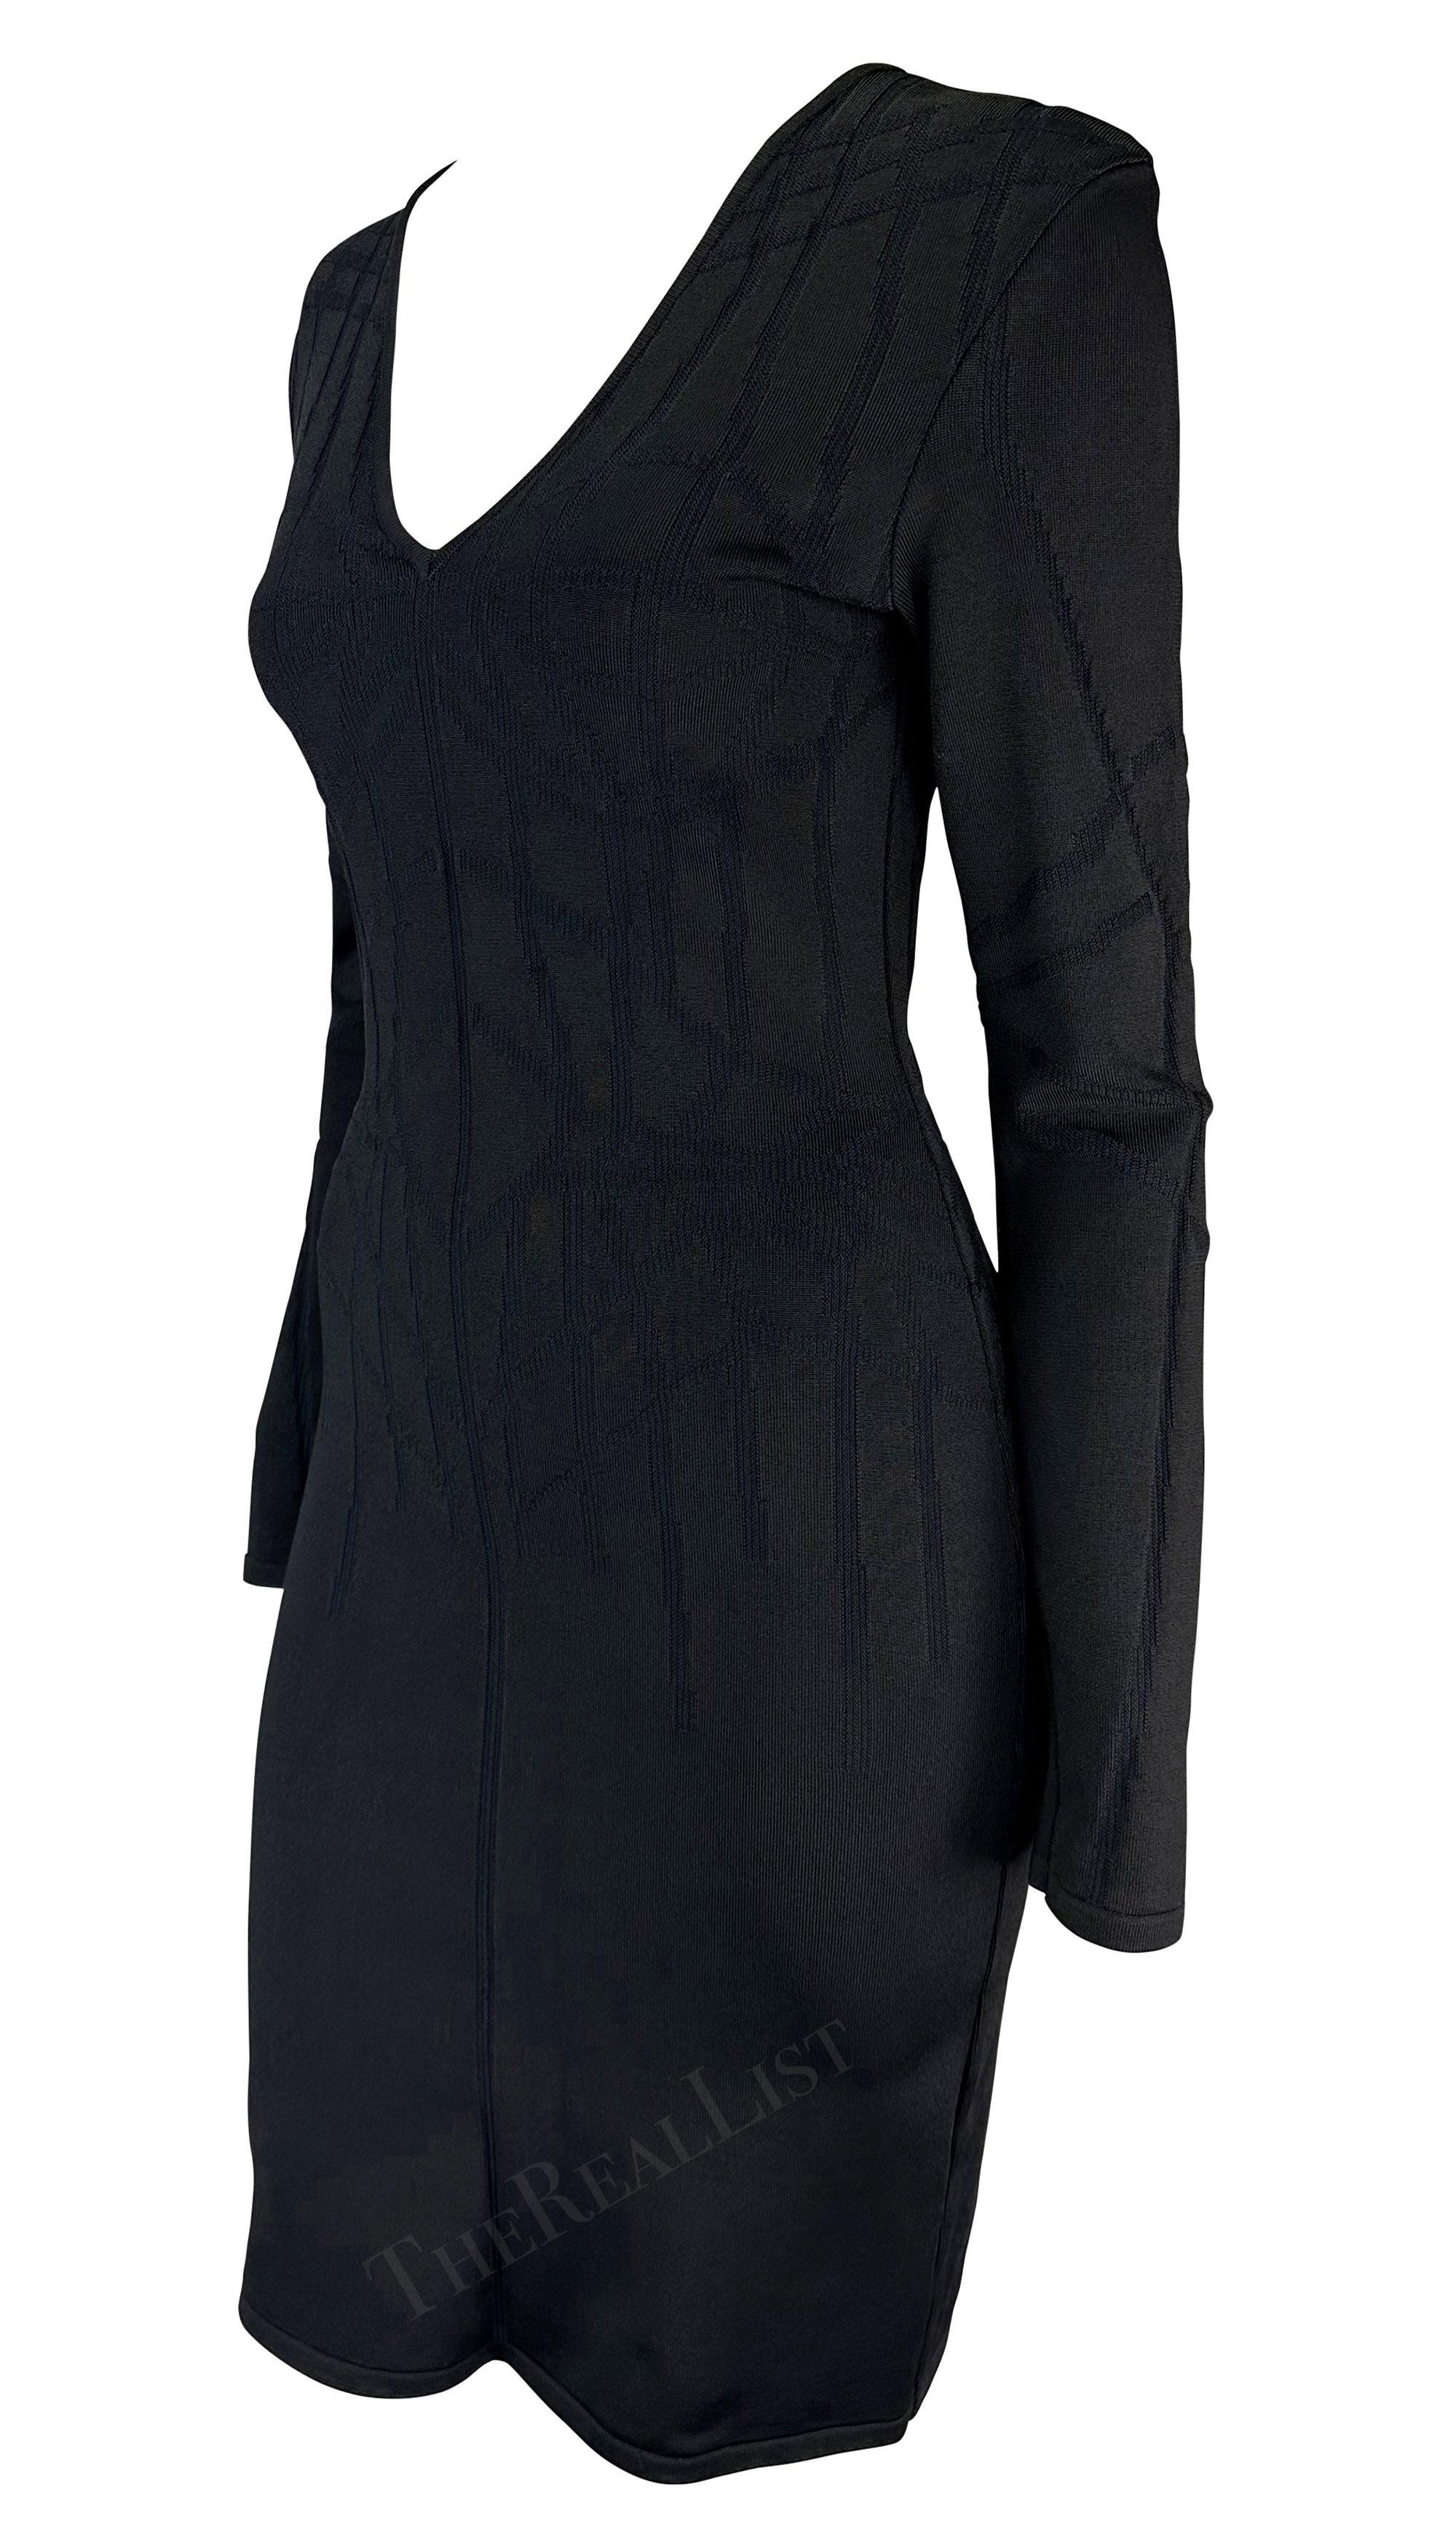 F/W 2001 Thierry Mugler Contour Outline Black Knit Bodycon Dress For Sale 4